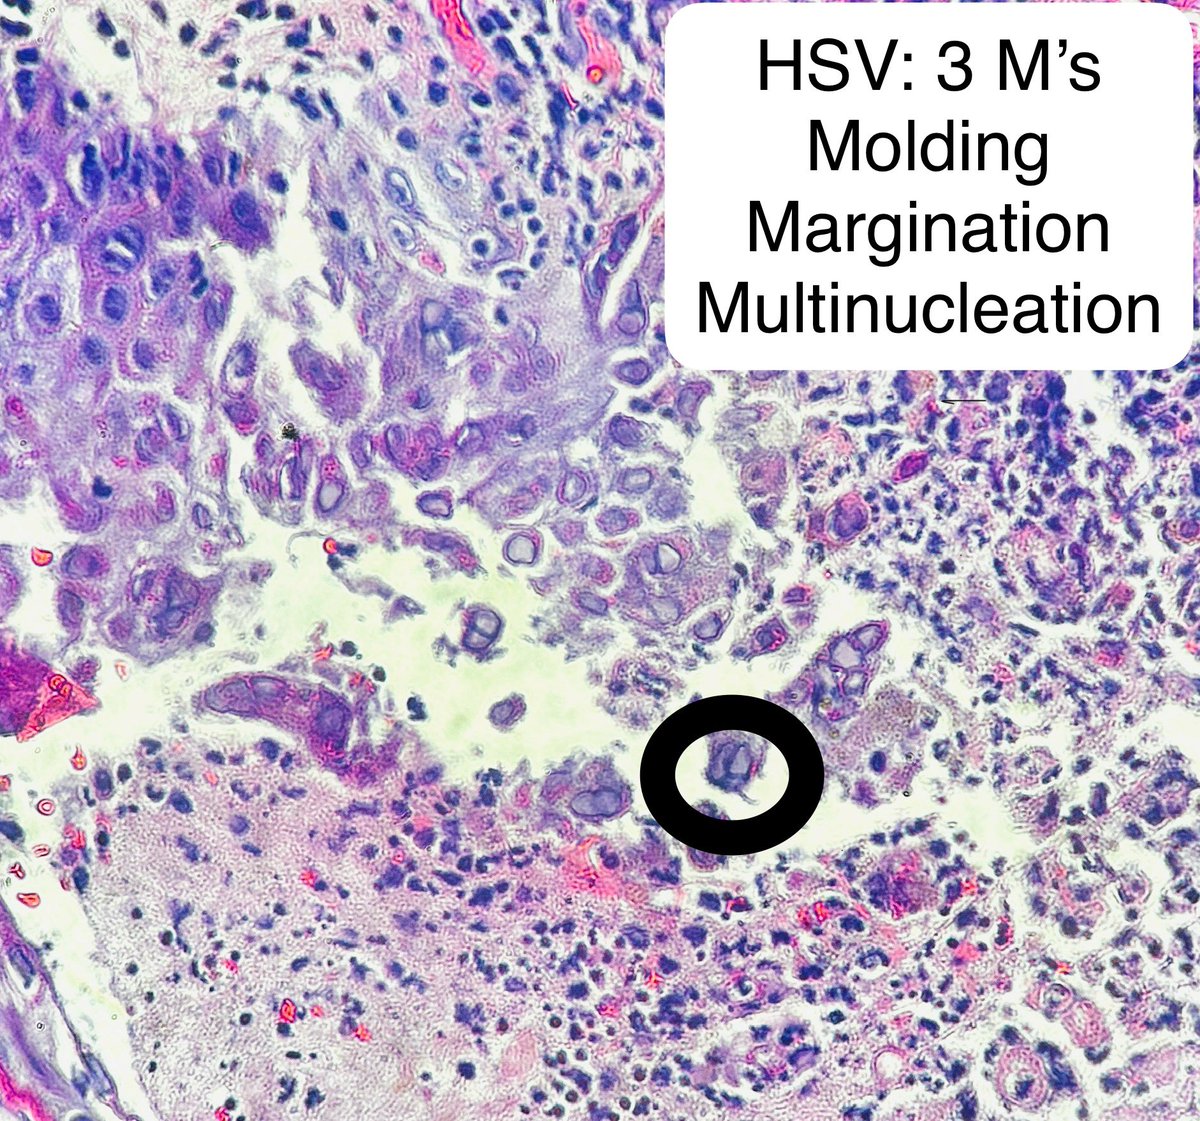 More for the pathology residents, non path residents, and med students:

Remember the 3 M’s!

Molding
Margination
Multinucleation

Here we have HSV infection of the skin

#pathagonia #pathx #medstudent #medstudentx #pathology #hsv #medx #infectiousdisease #surgpath #herpes